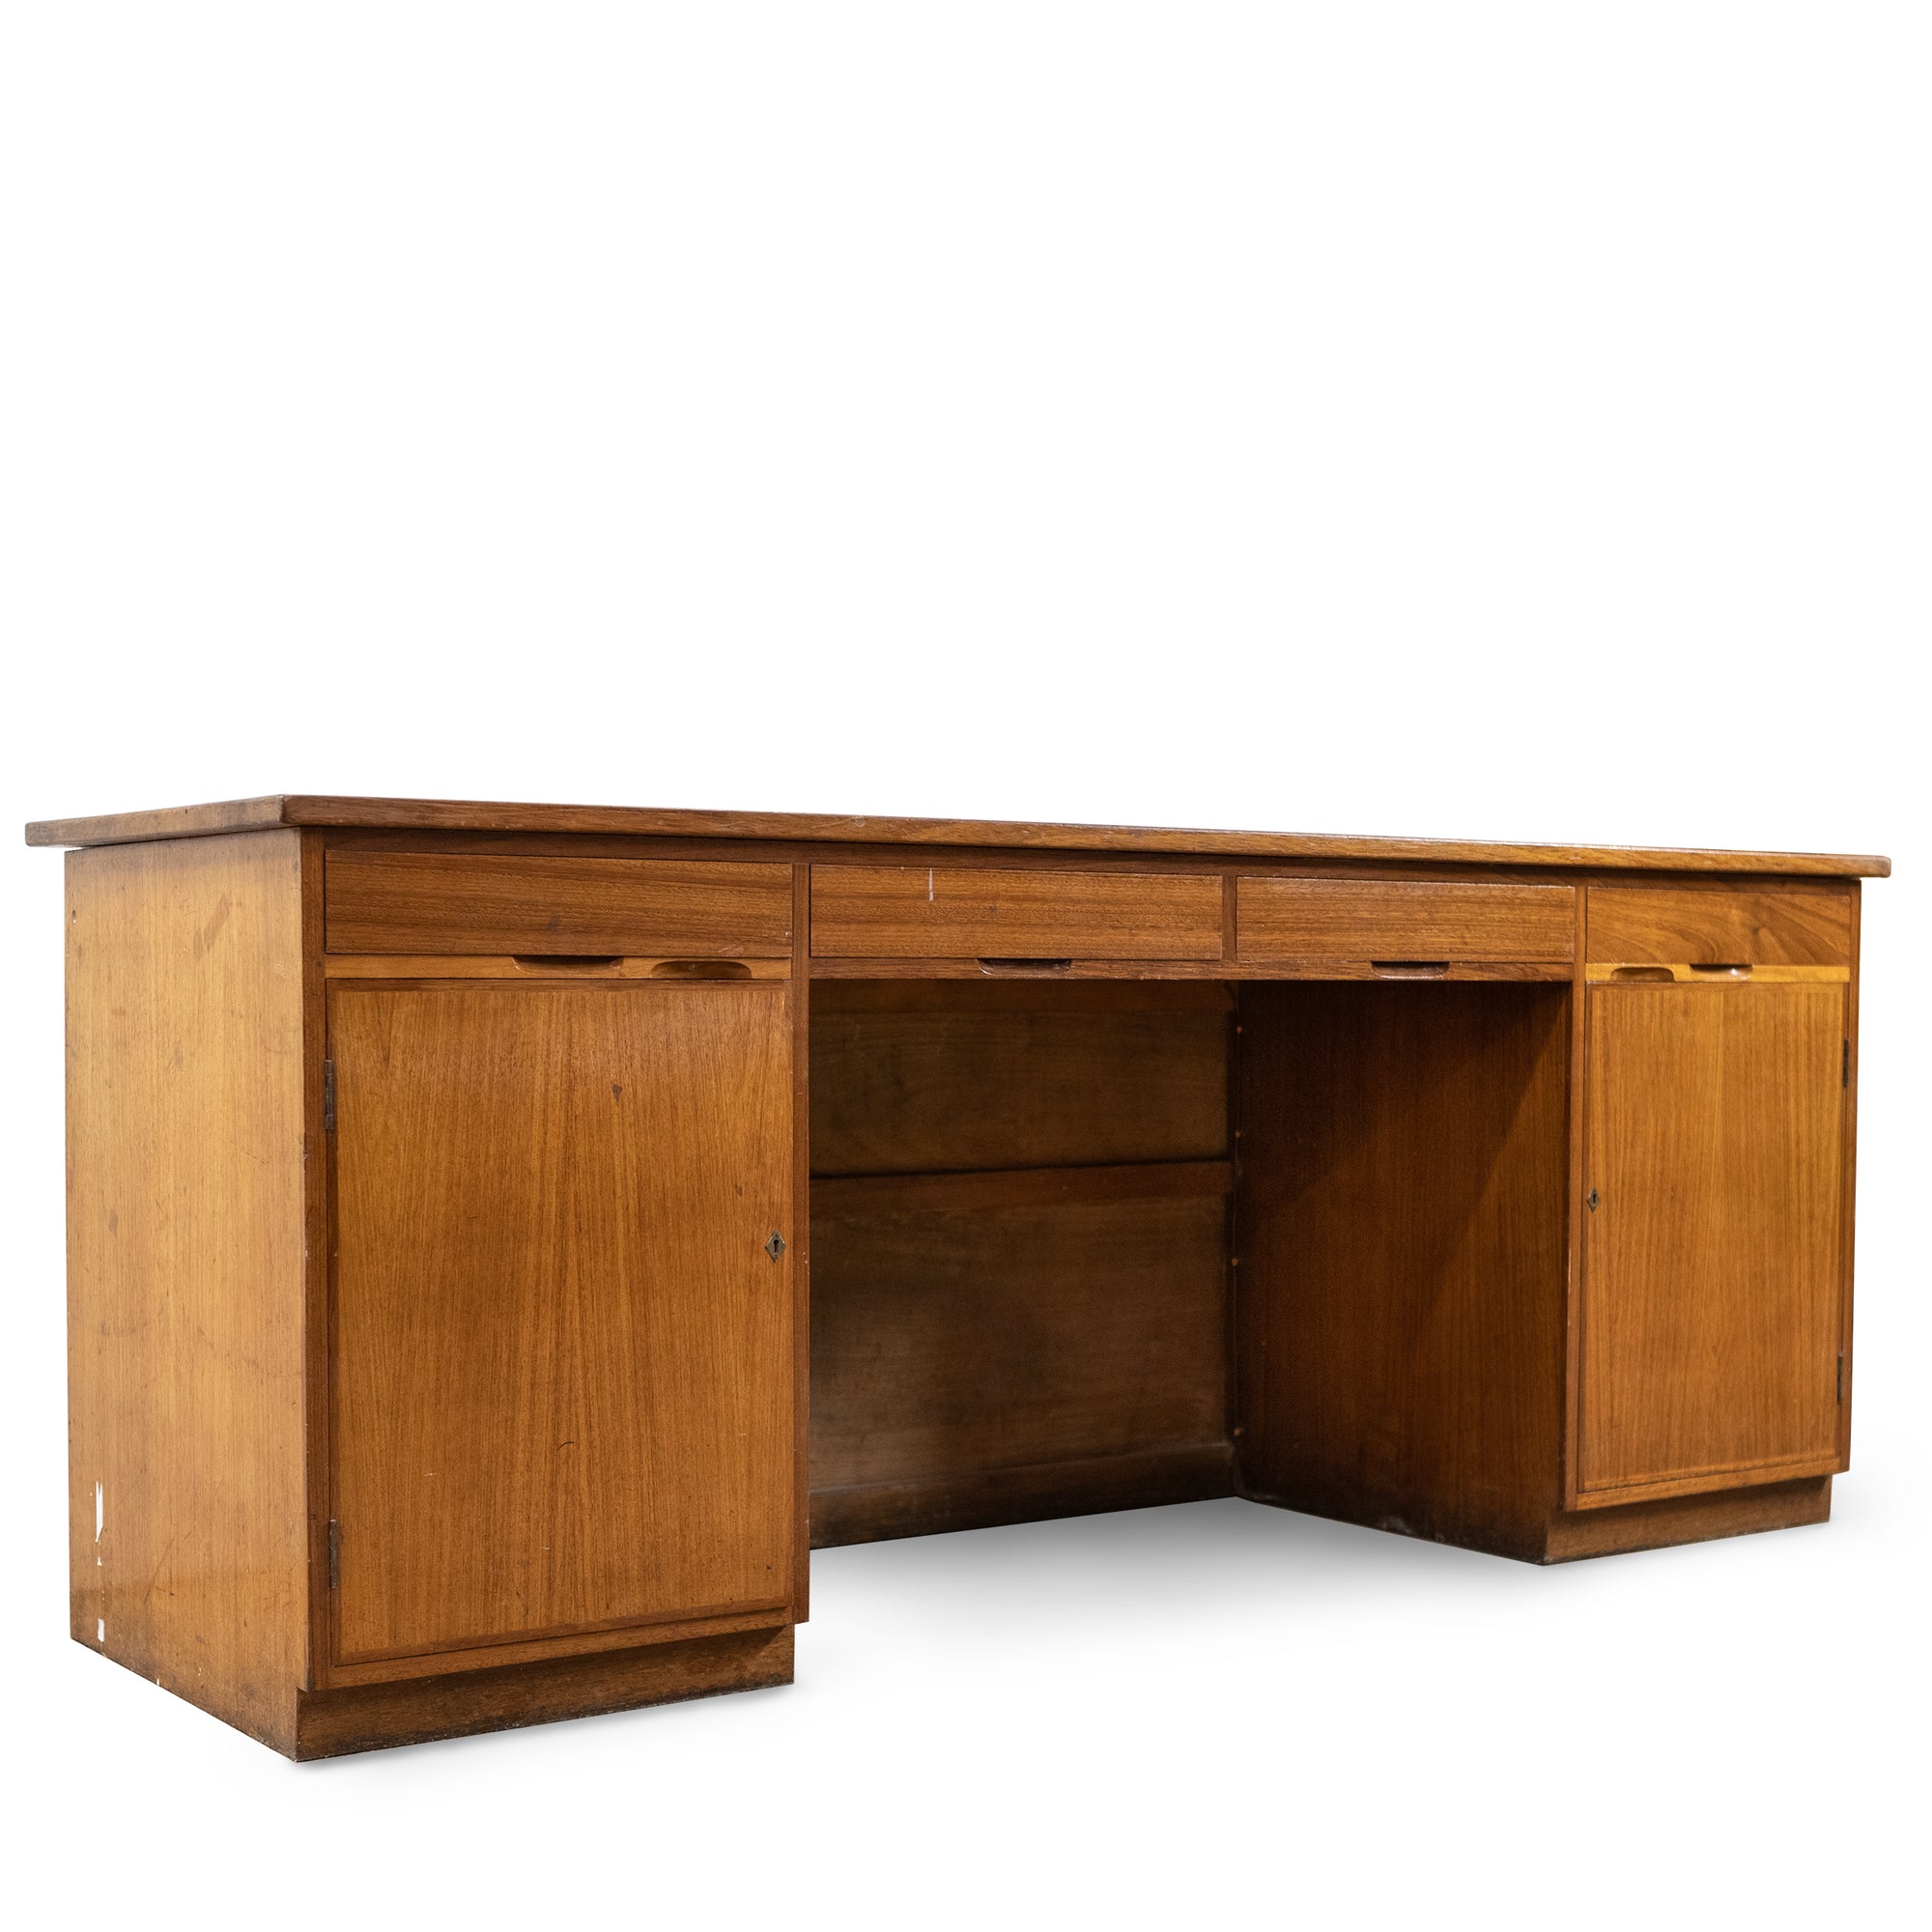 Reclaimed Mid-Century Solid Teak Sideboard Desk Unit With Cupboards & Drawers | The Architectural Forum